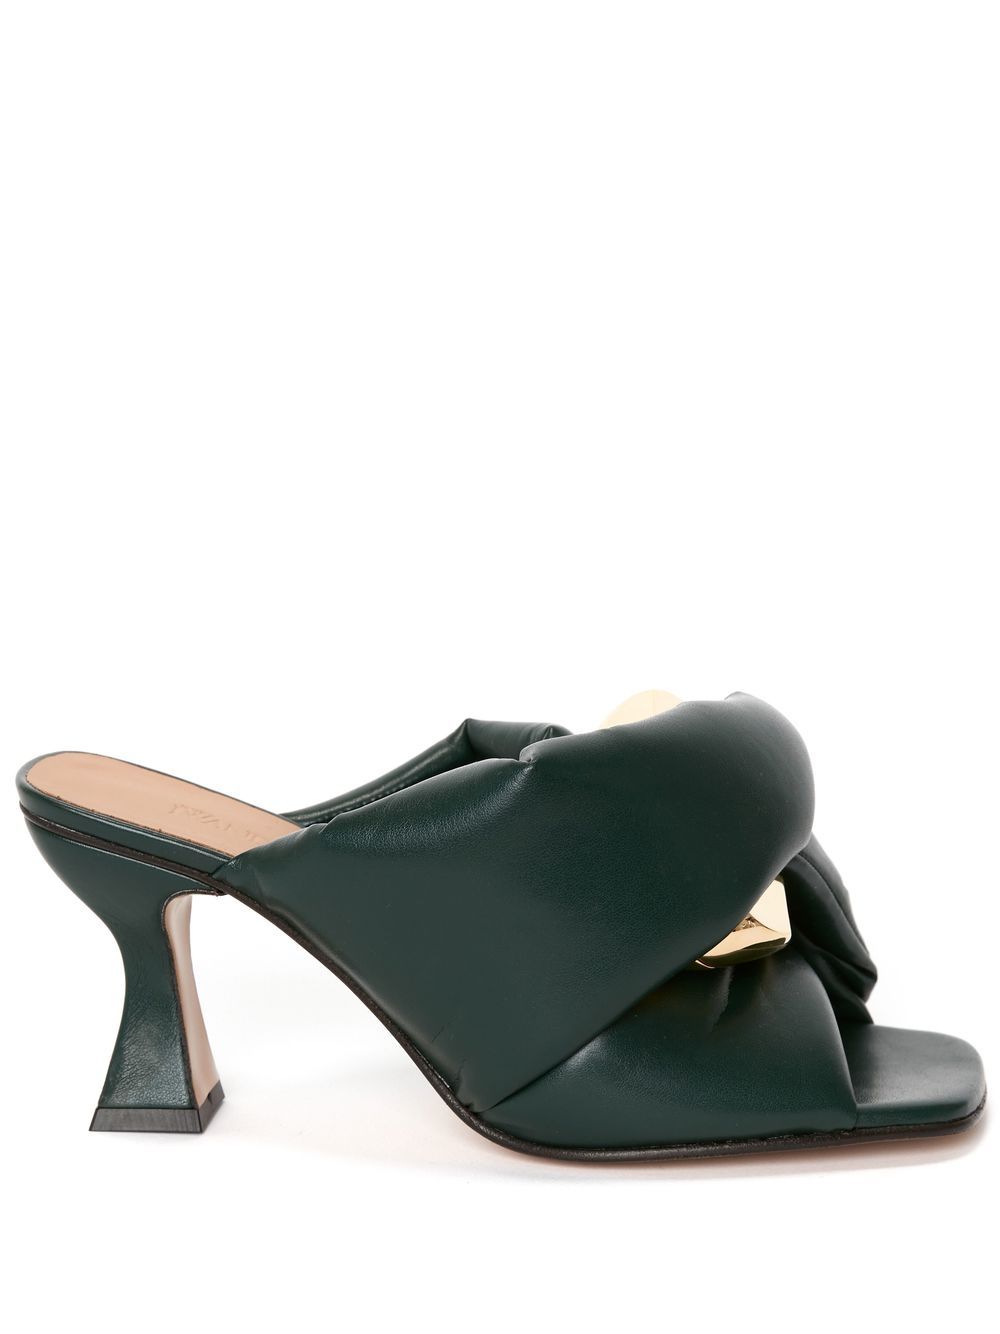 JW Anderson Chain Twist heeled mules - FOREST GREEN